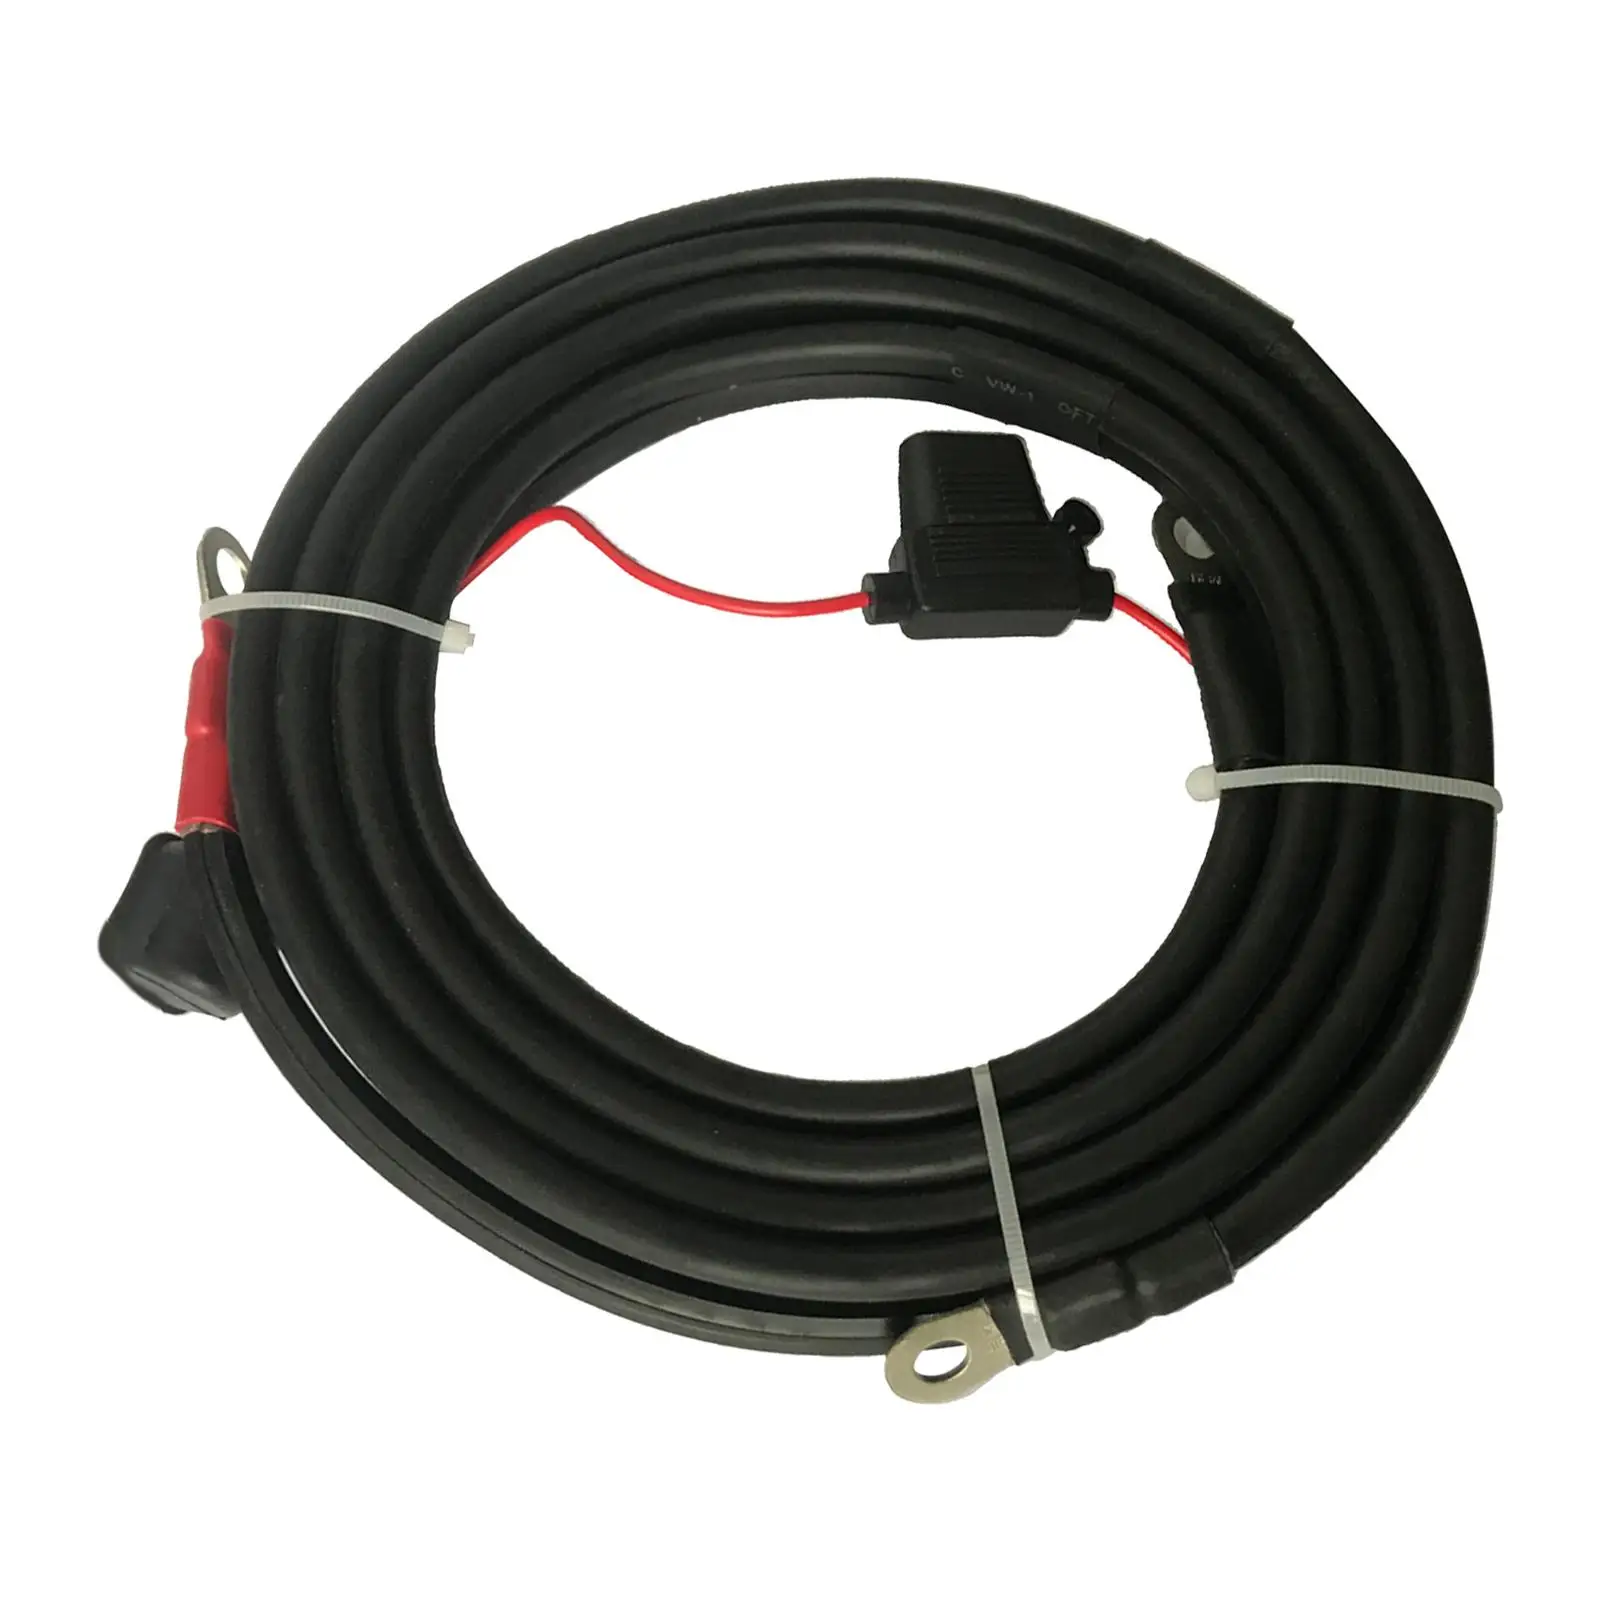 2 Meters Battery Power Cables Leads for Outboard Engine Motor Universal 